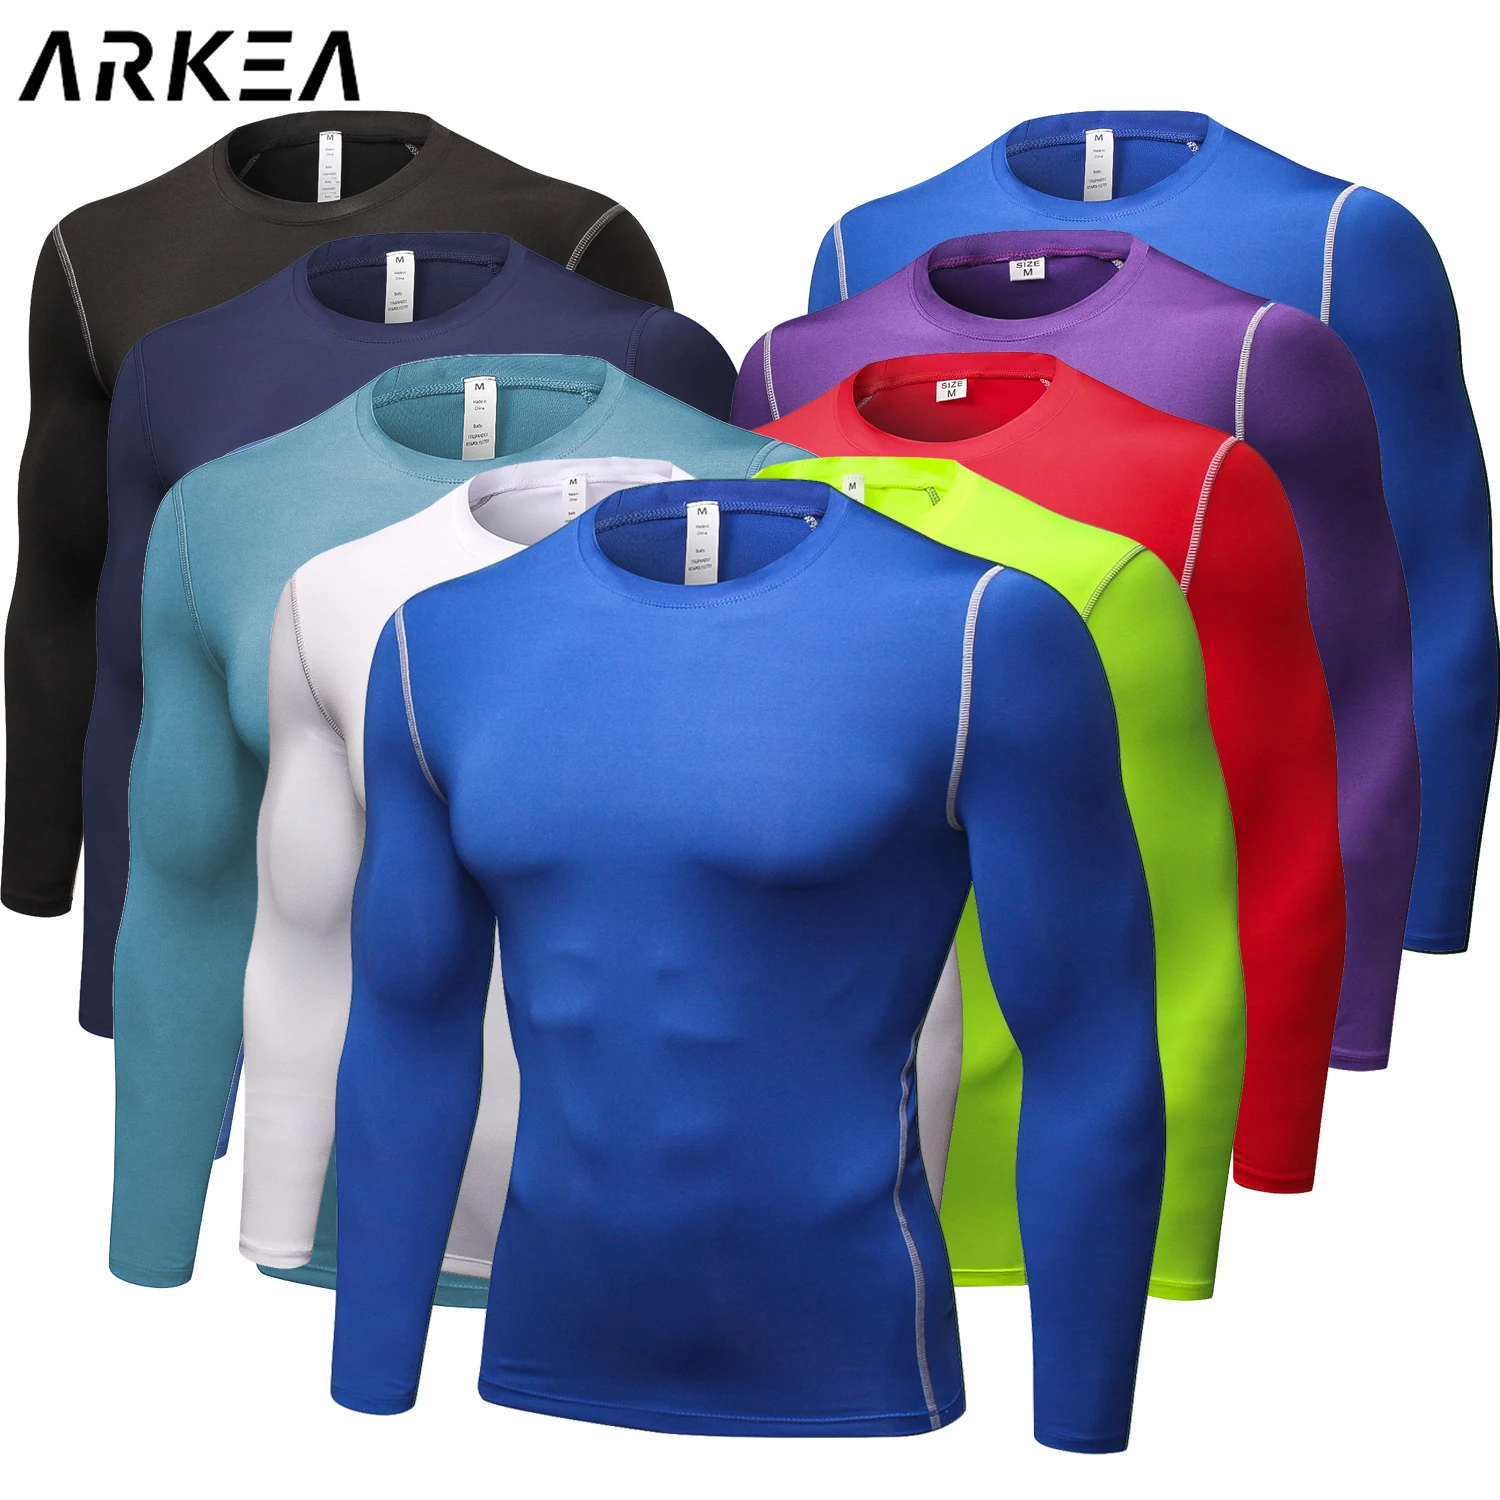 

Bodybuilding Sport T-shirt Quick Dry Running Shirt Long Sleeve High elasticity Compression Top Gym clothes Fitness Tight shirt